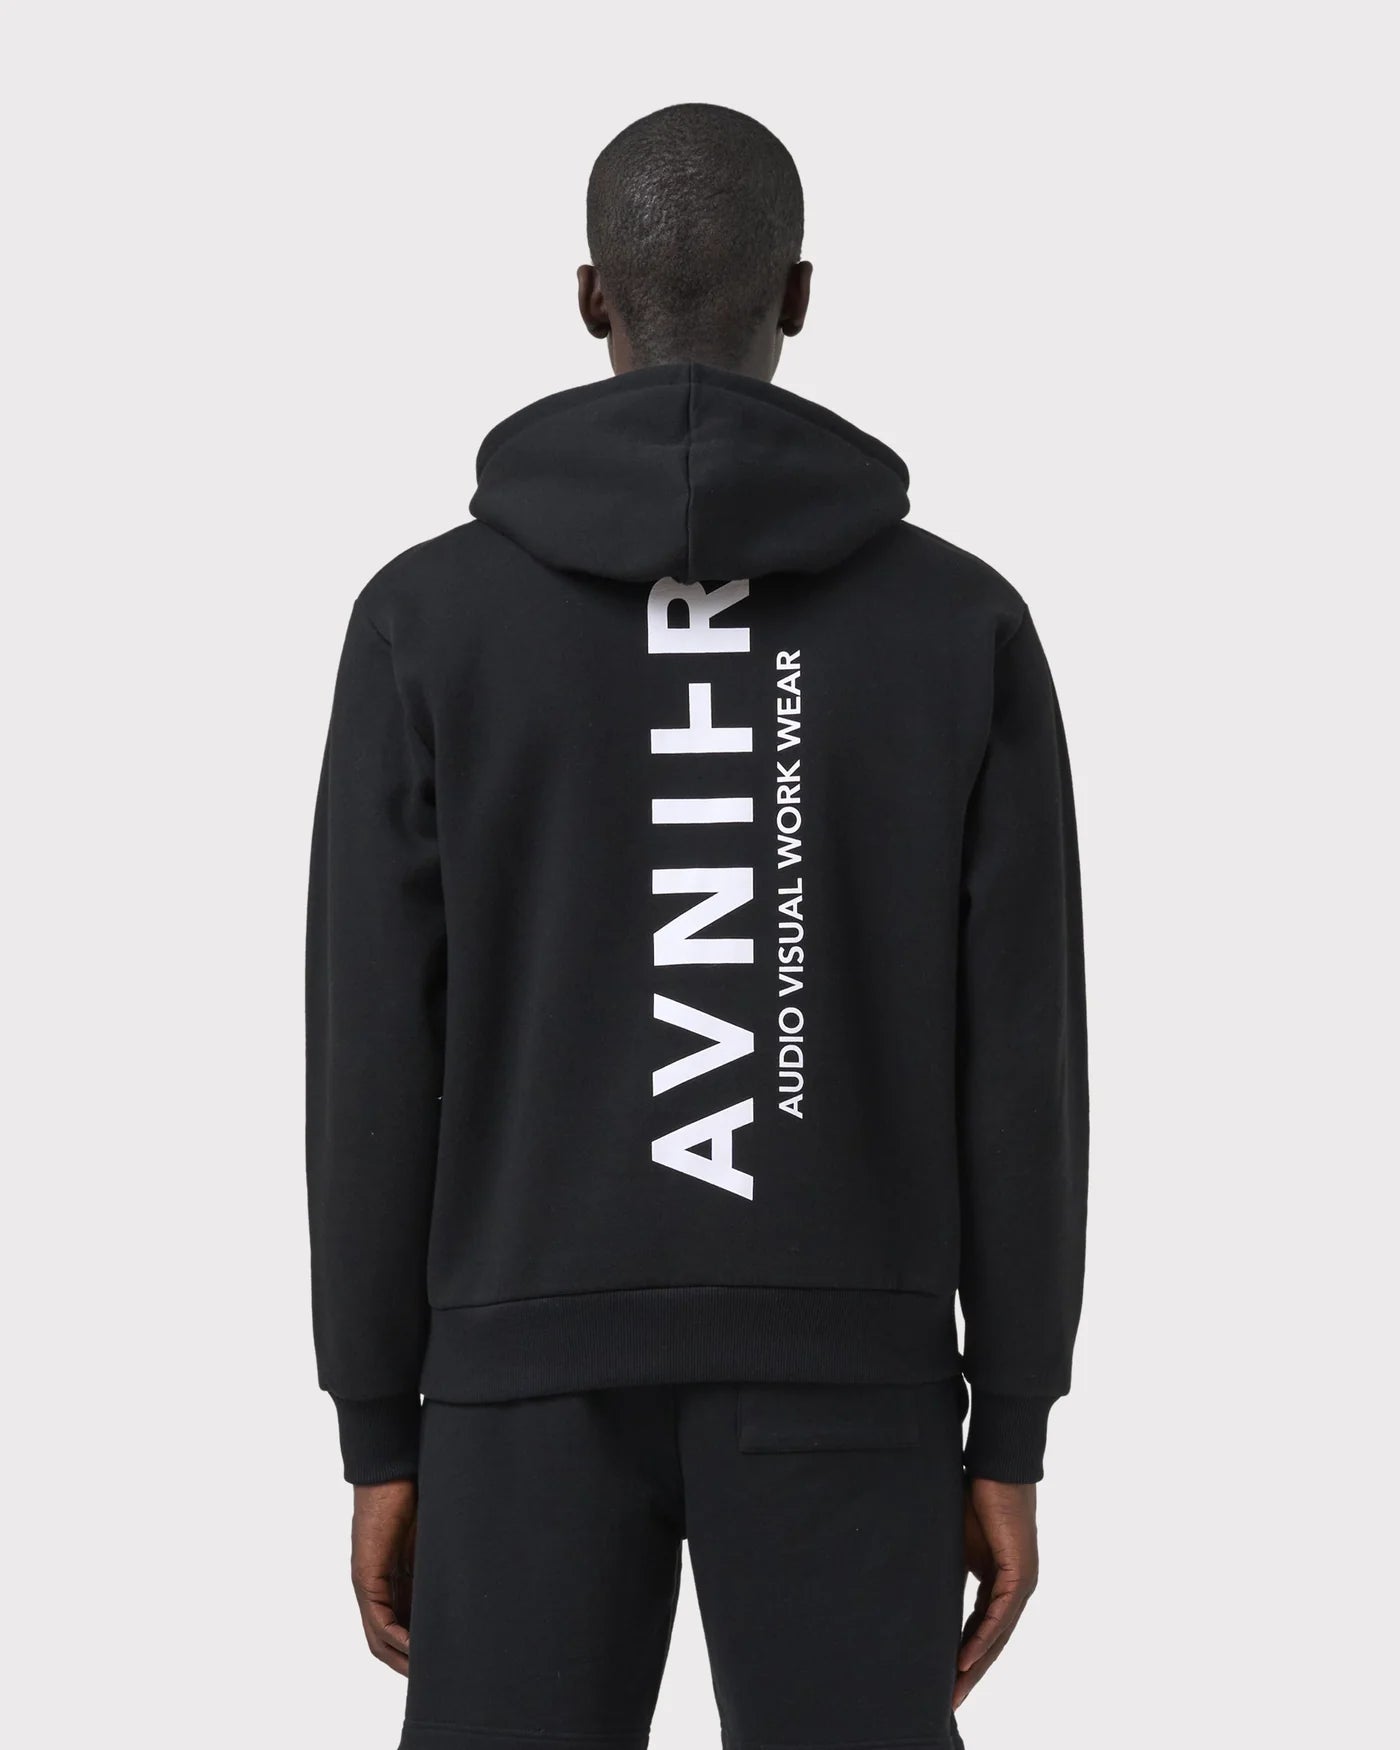 Hoodie Onset Vertical V2.3 - Coton